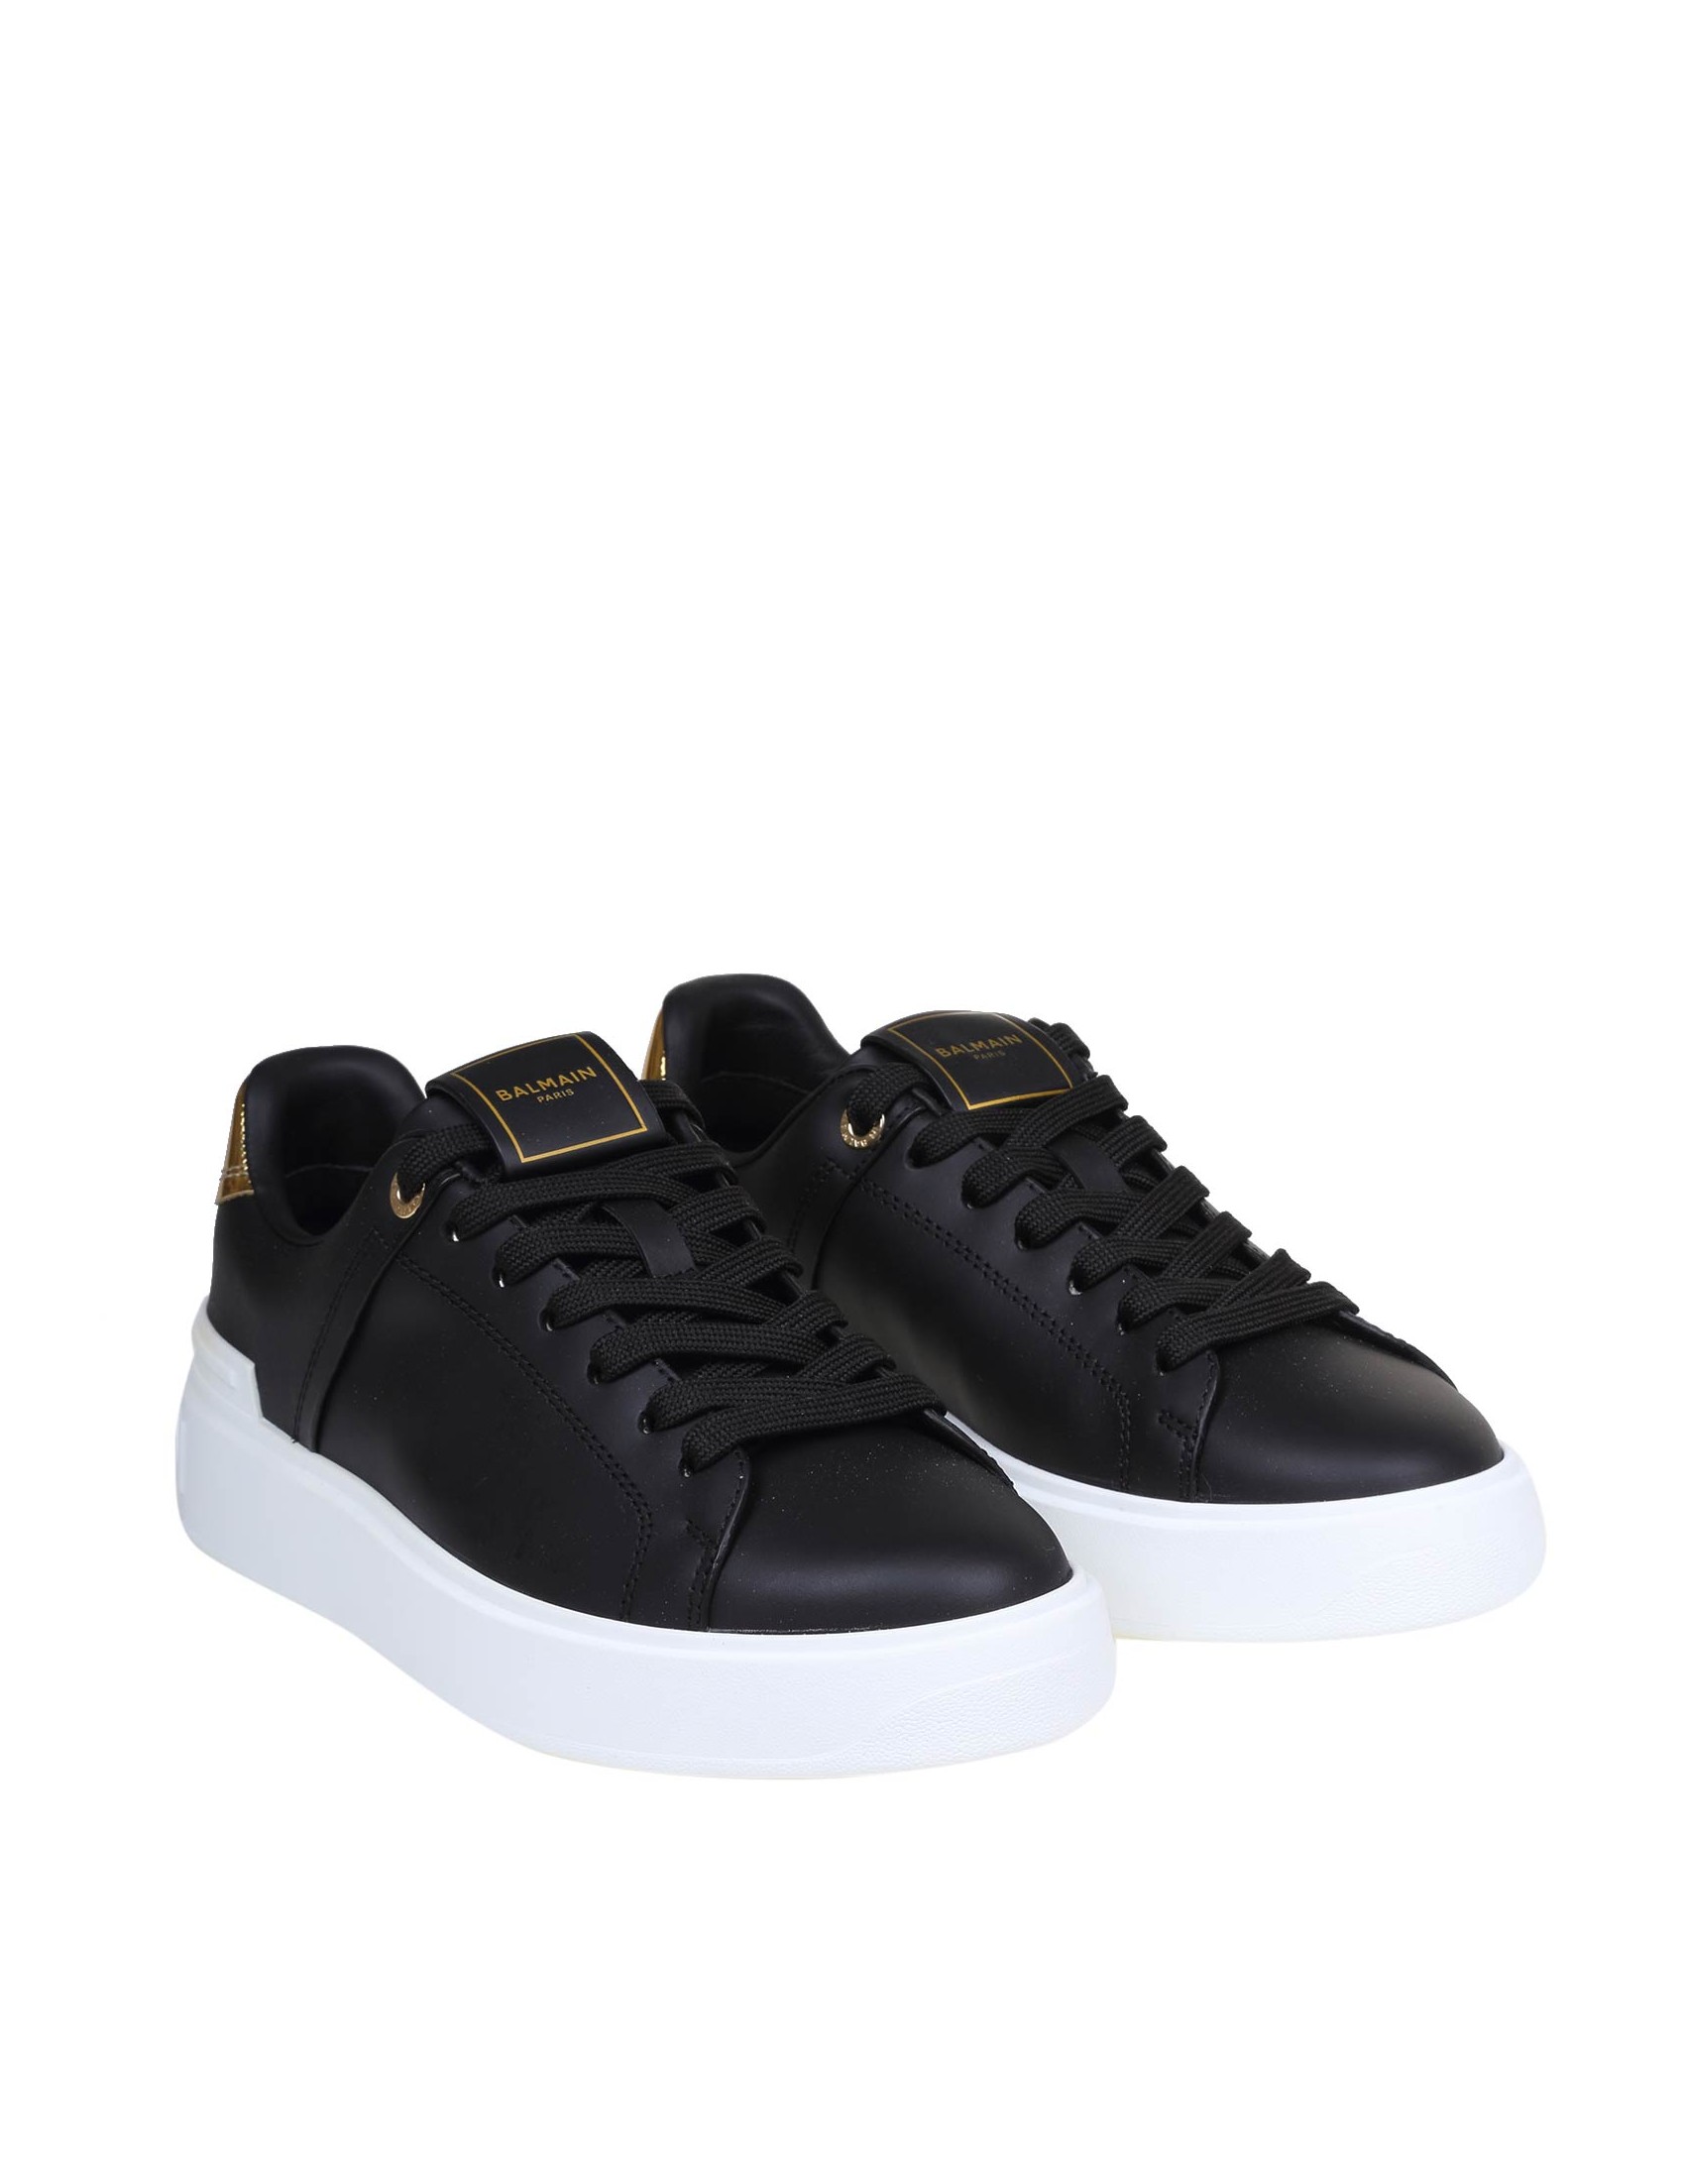 SNEAKERS BLACK LEATHER